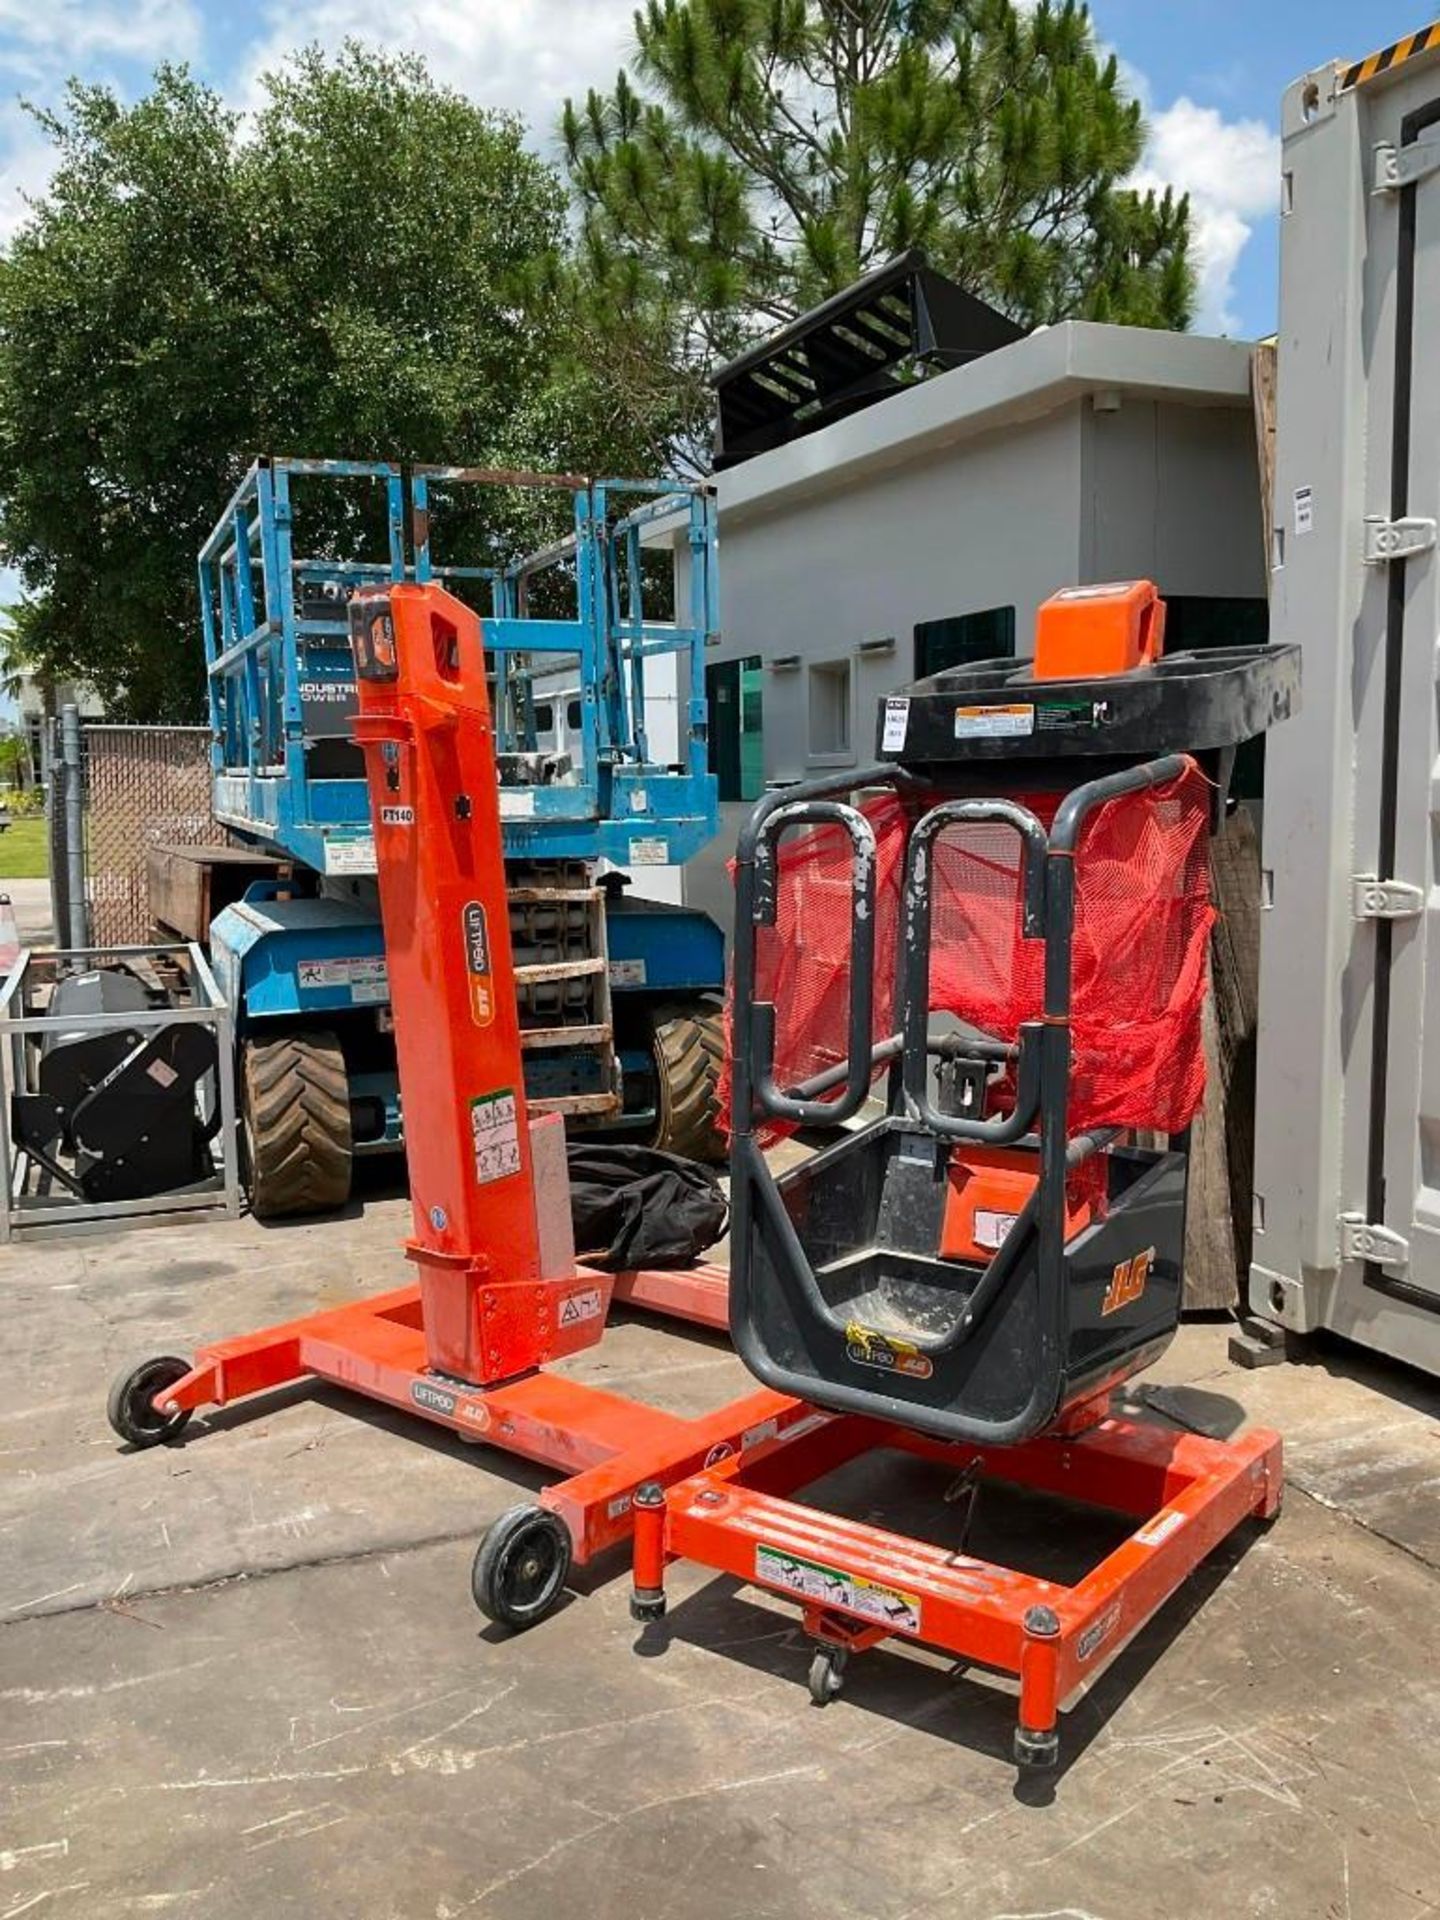 ( 1 ) JLG PERSONAL PORTABLE LIFTPOD MODEL FT140, APPROX MAX CAPACITY 330LBS, APPROX MAX HEIGHT 13.5F - Image 3 of 13